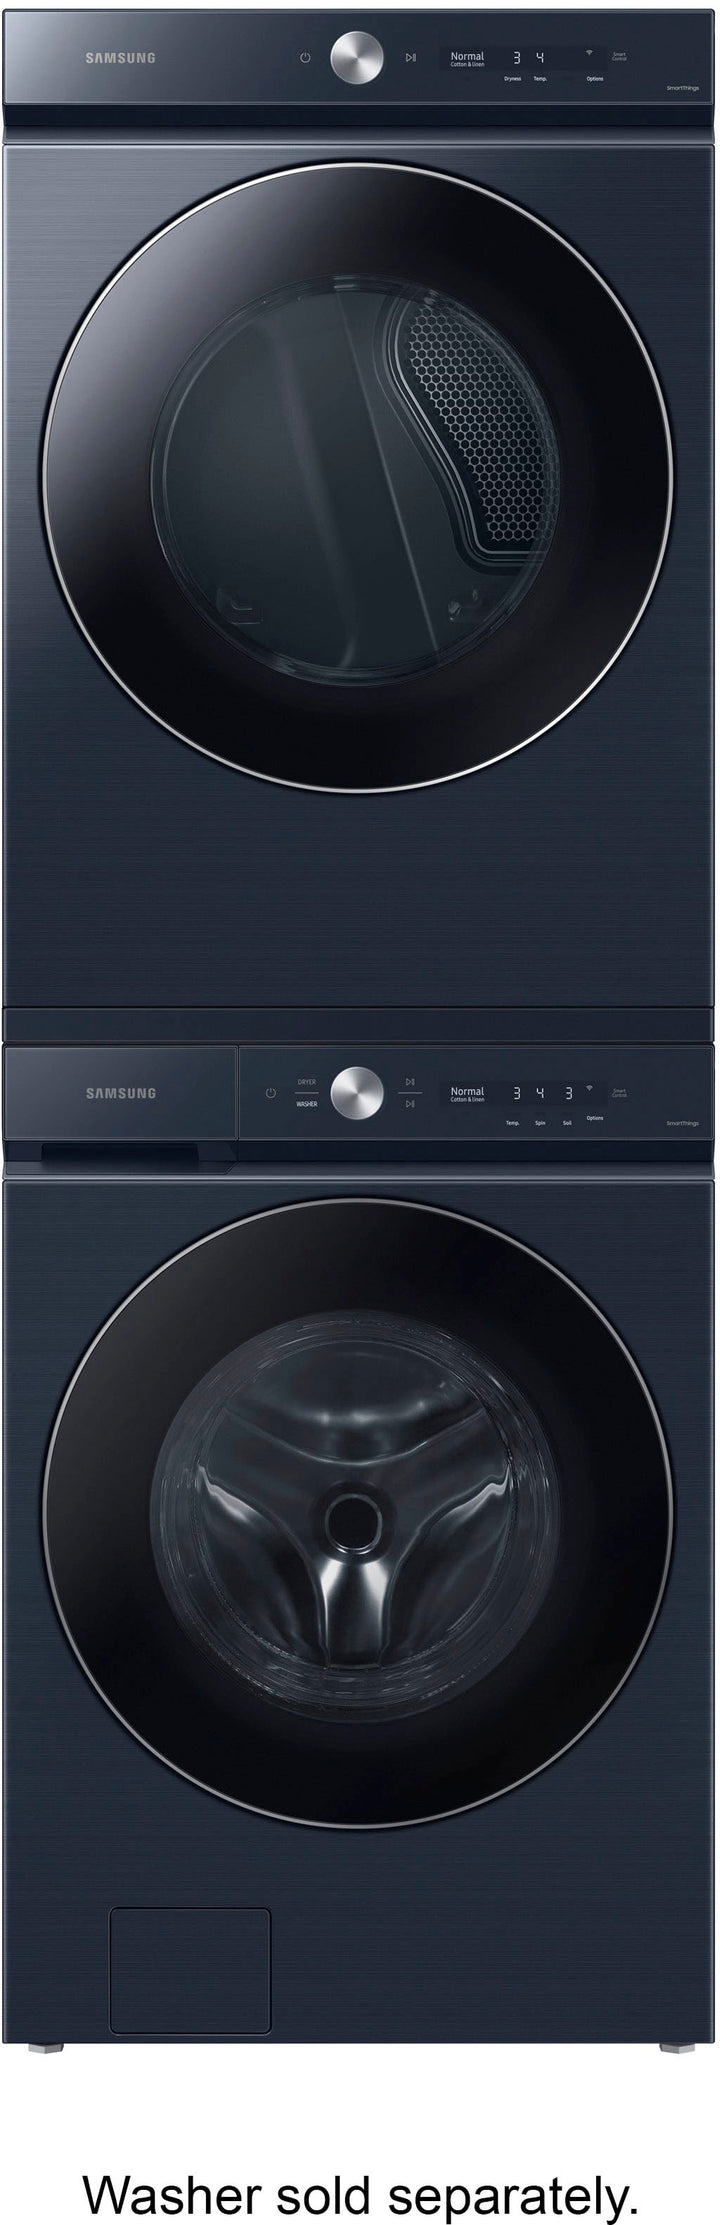 Samsung - Bespoke 7.6 cu. ft. Ultra Capacity Electric Dryer with AI Optimal Dry and Super Speed Dry - Brushed navy_10